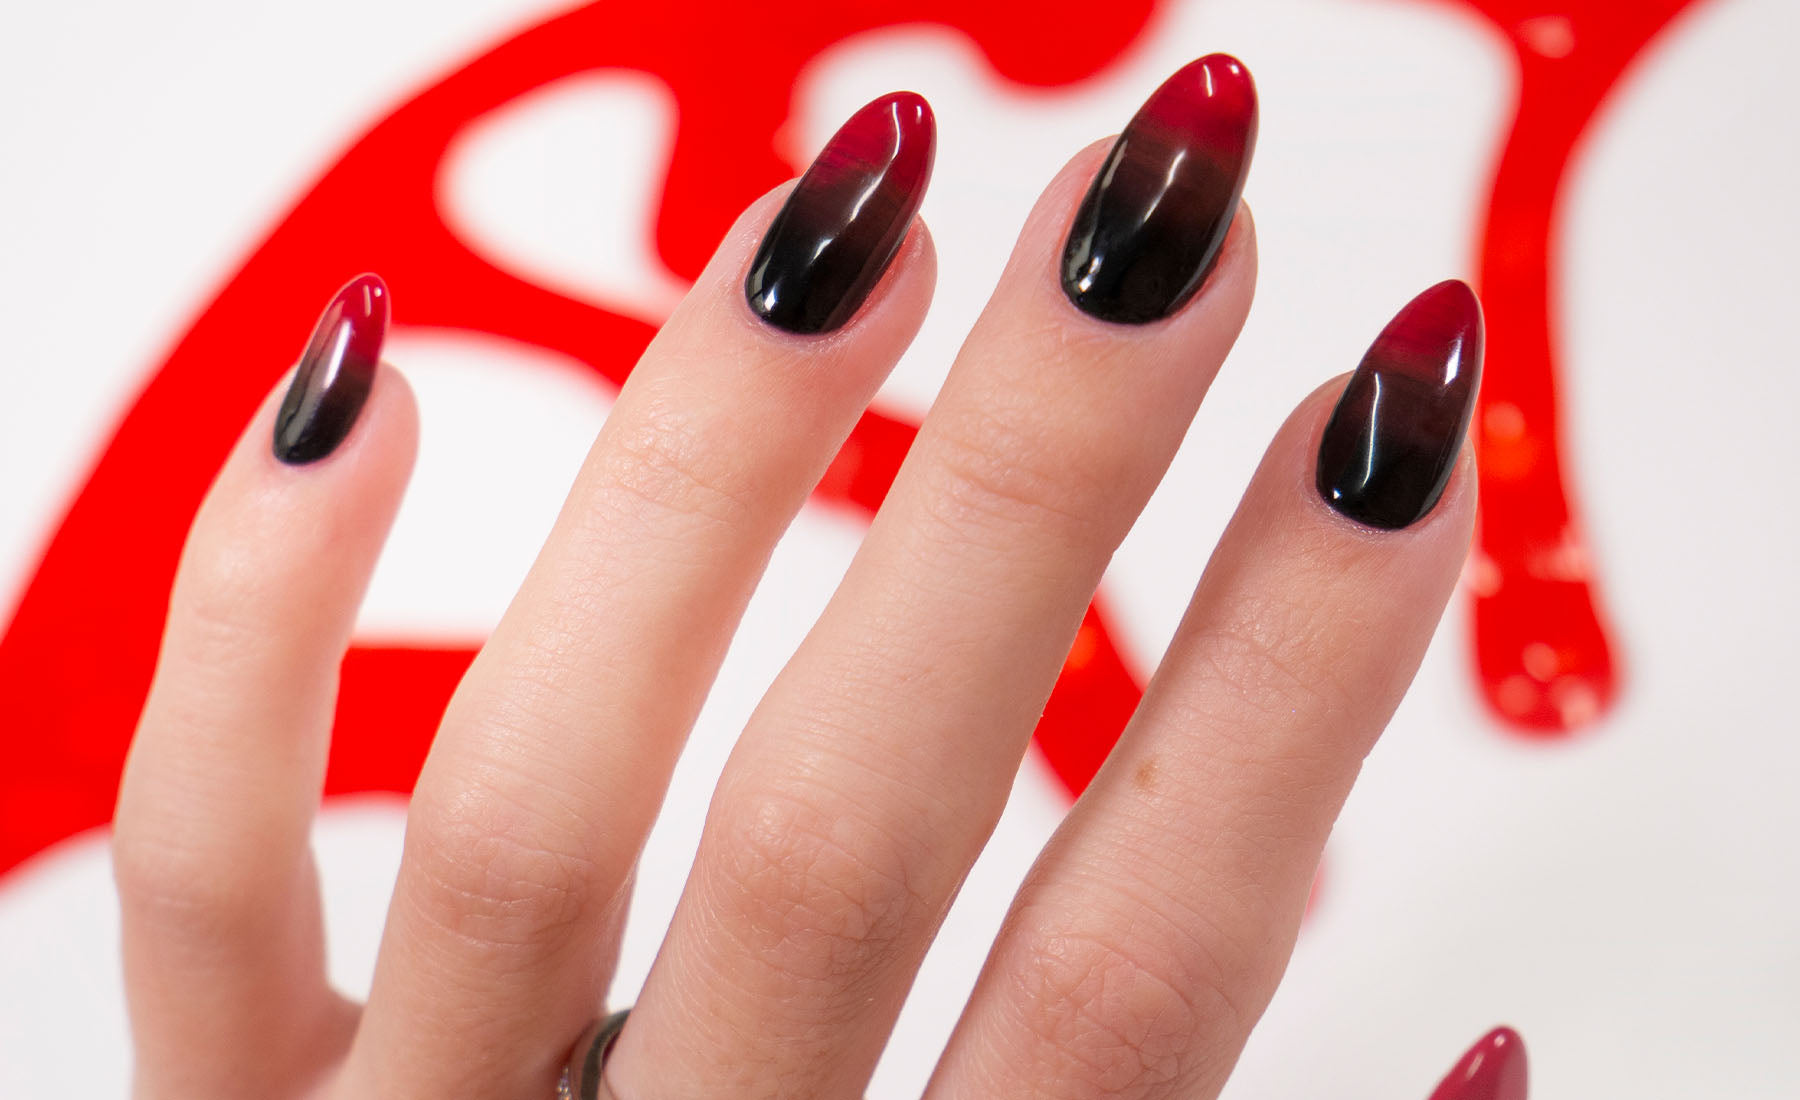 The Best Halloween Nail Art Ideas for 2022